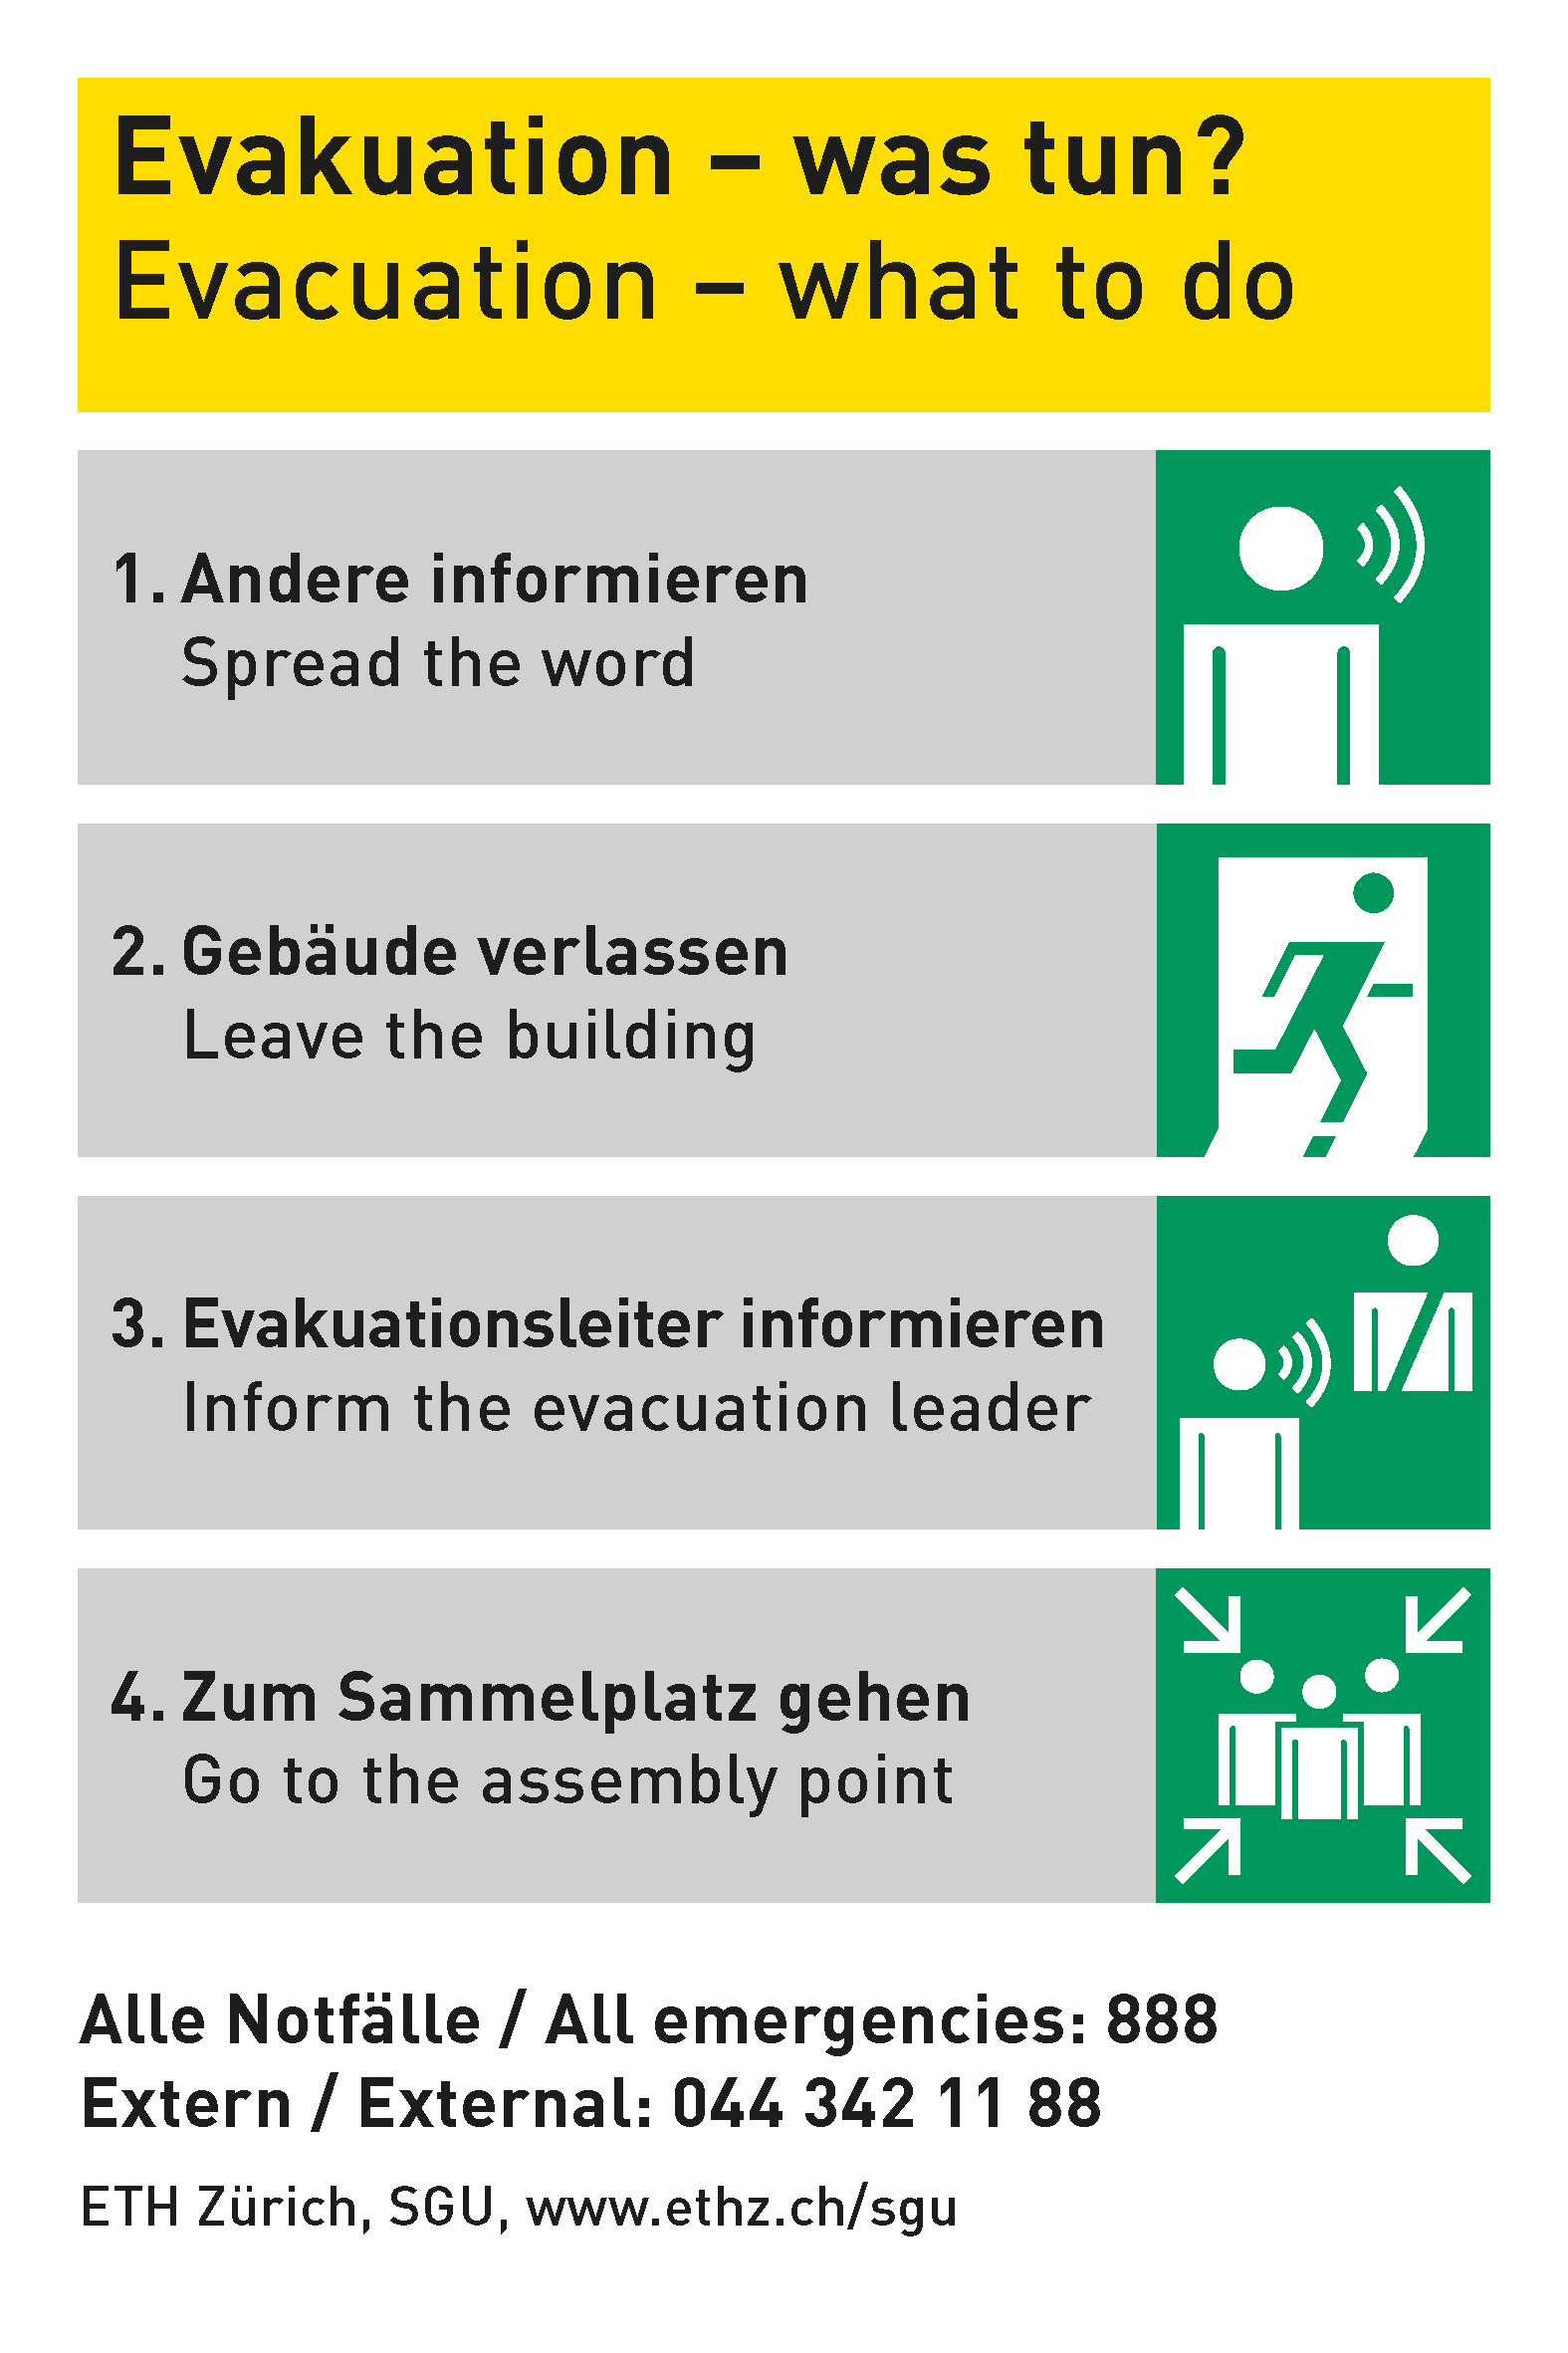 Enlarged view: Evakuation – was tun? 1. Spread the word 2. Leave the building 3. Inform the evacuation leader 4. Go to assembly point